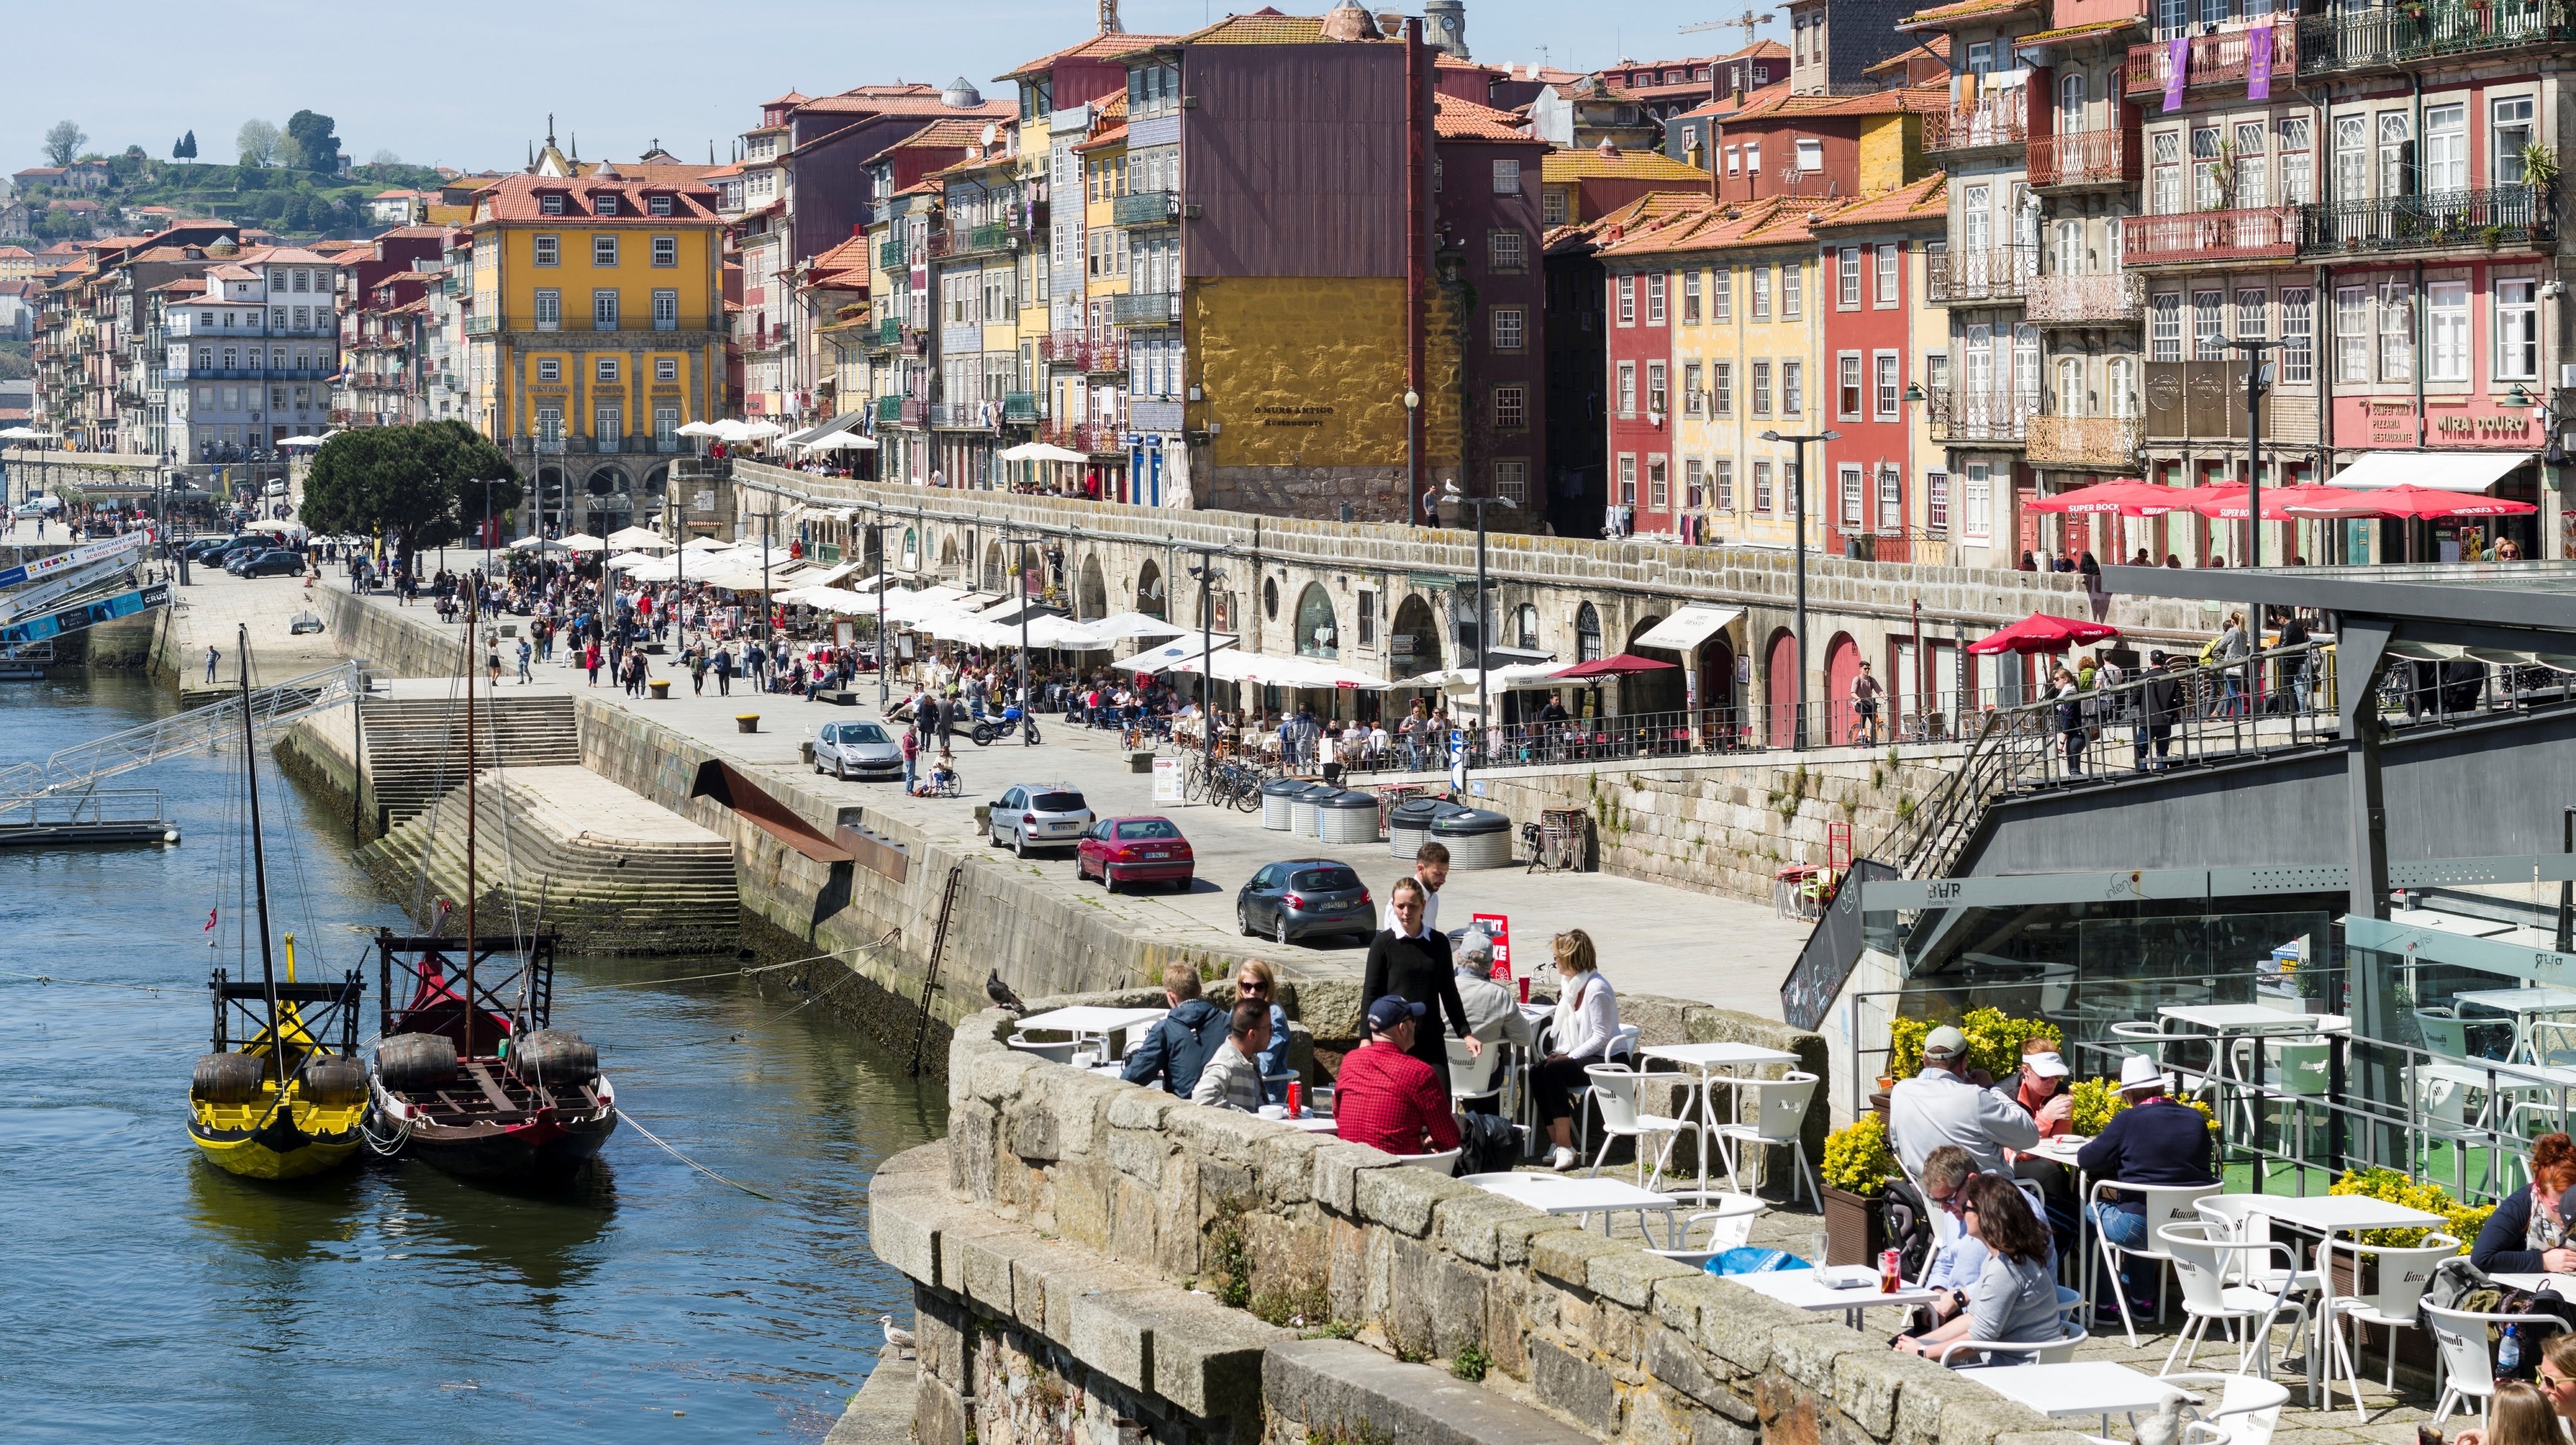 The quarter Ribeira at the old harbour in the old town with the iconic row of houses